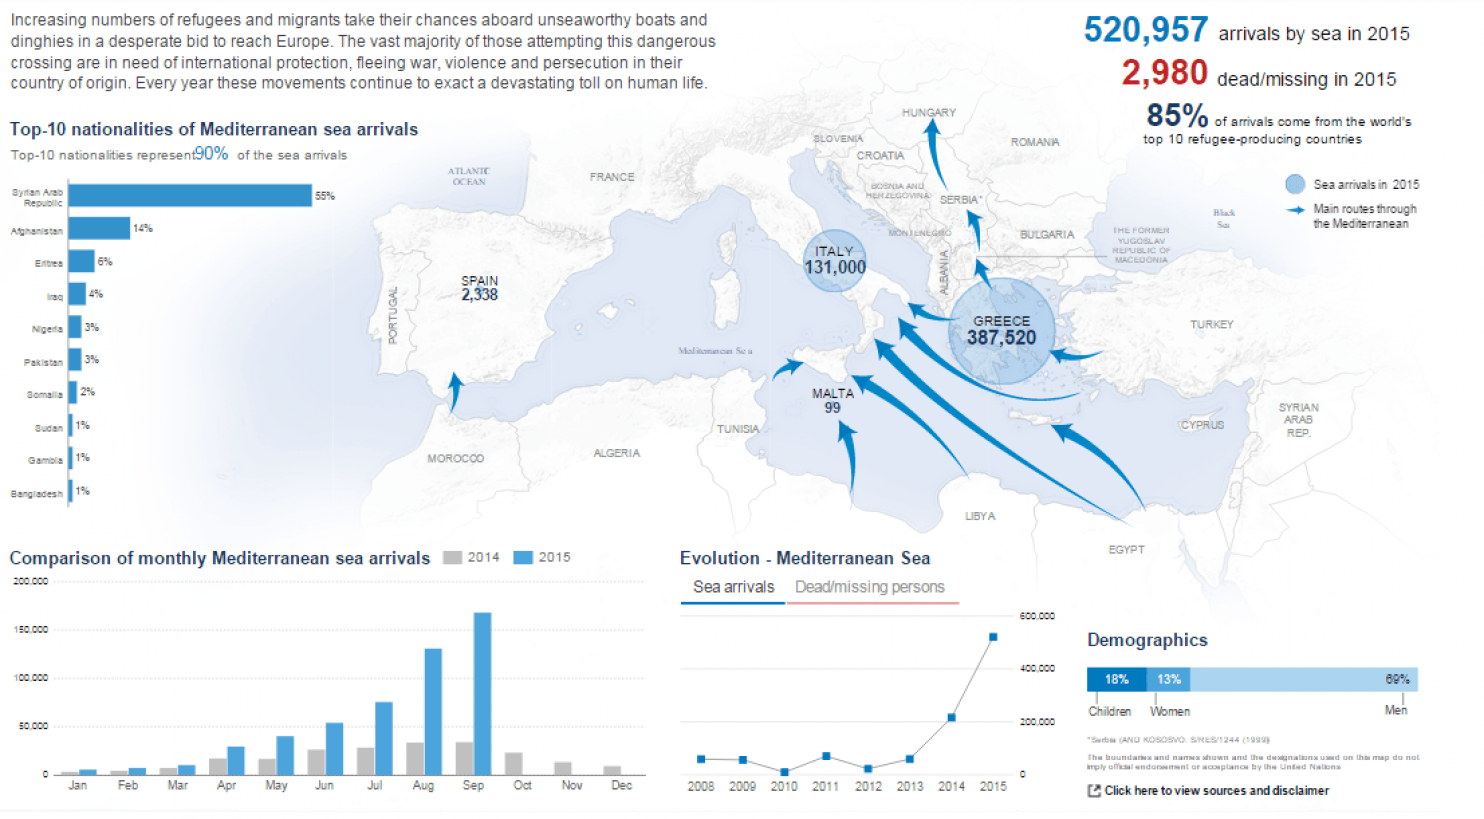 wapo-migration-flows-and-monthly-sea-arrivals